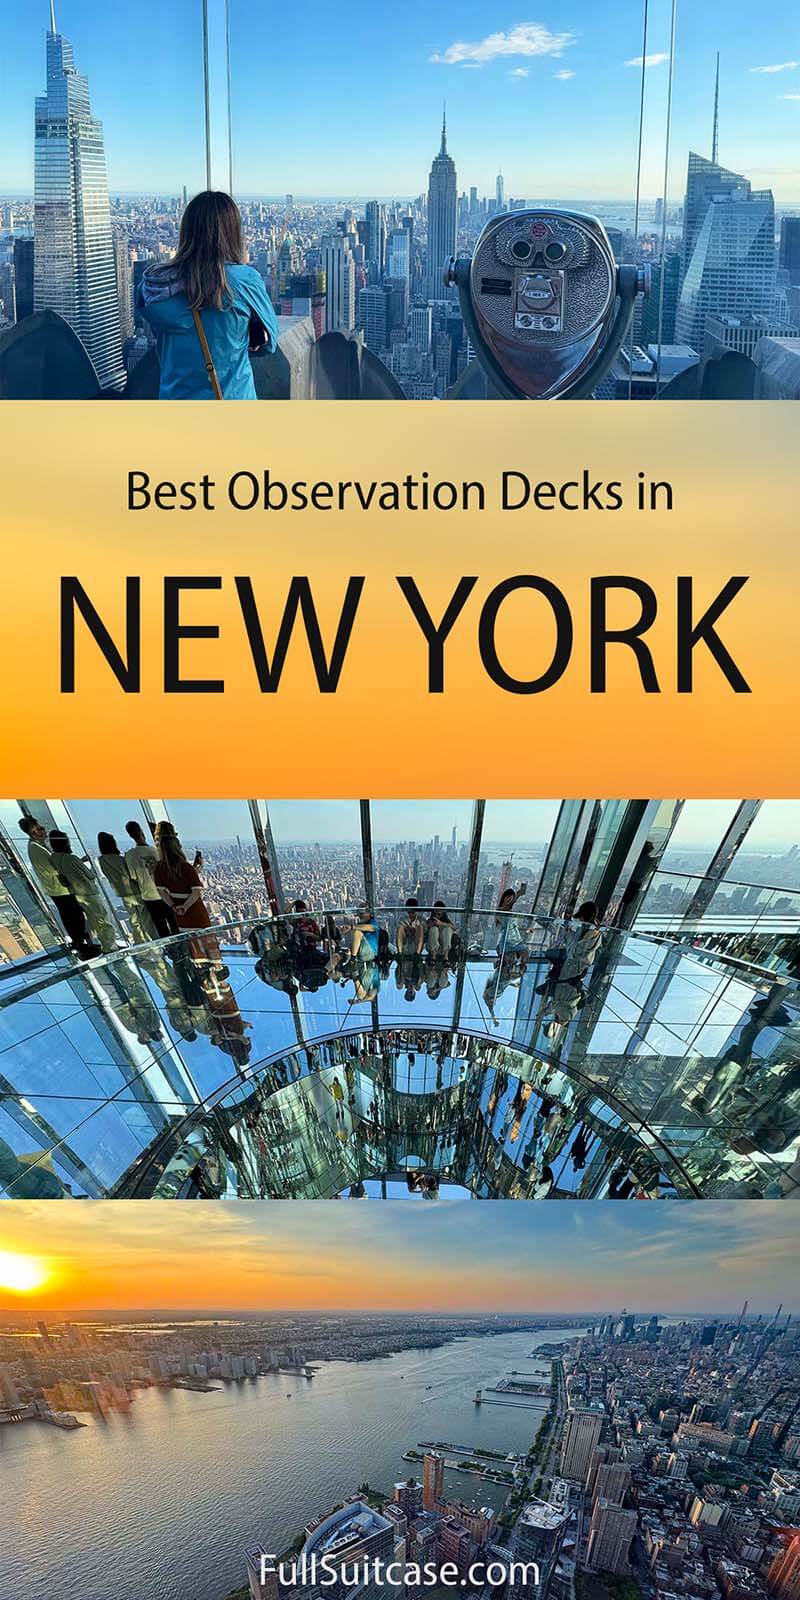 Best viewing platforms and observation decks in NYC, USA